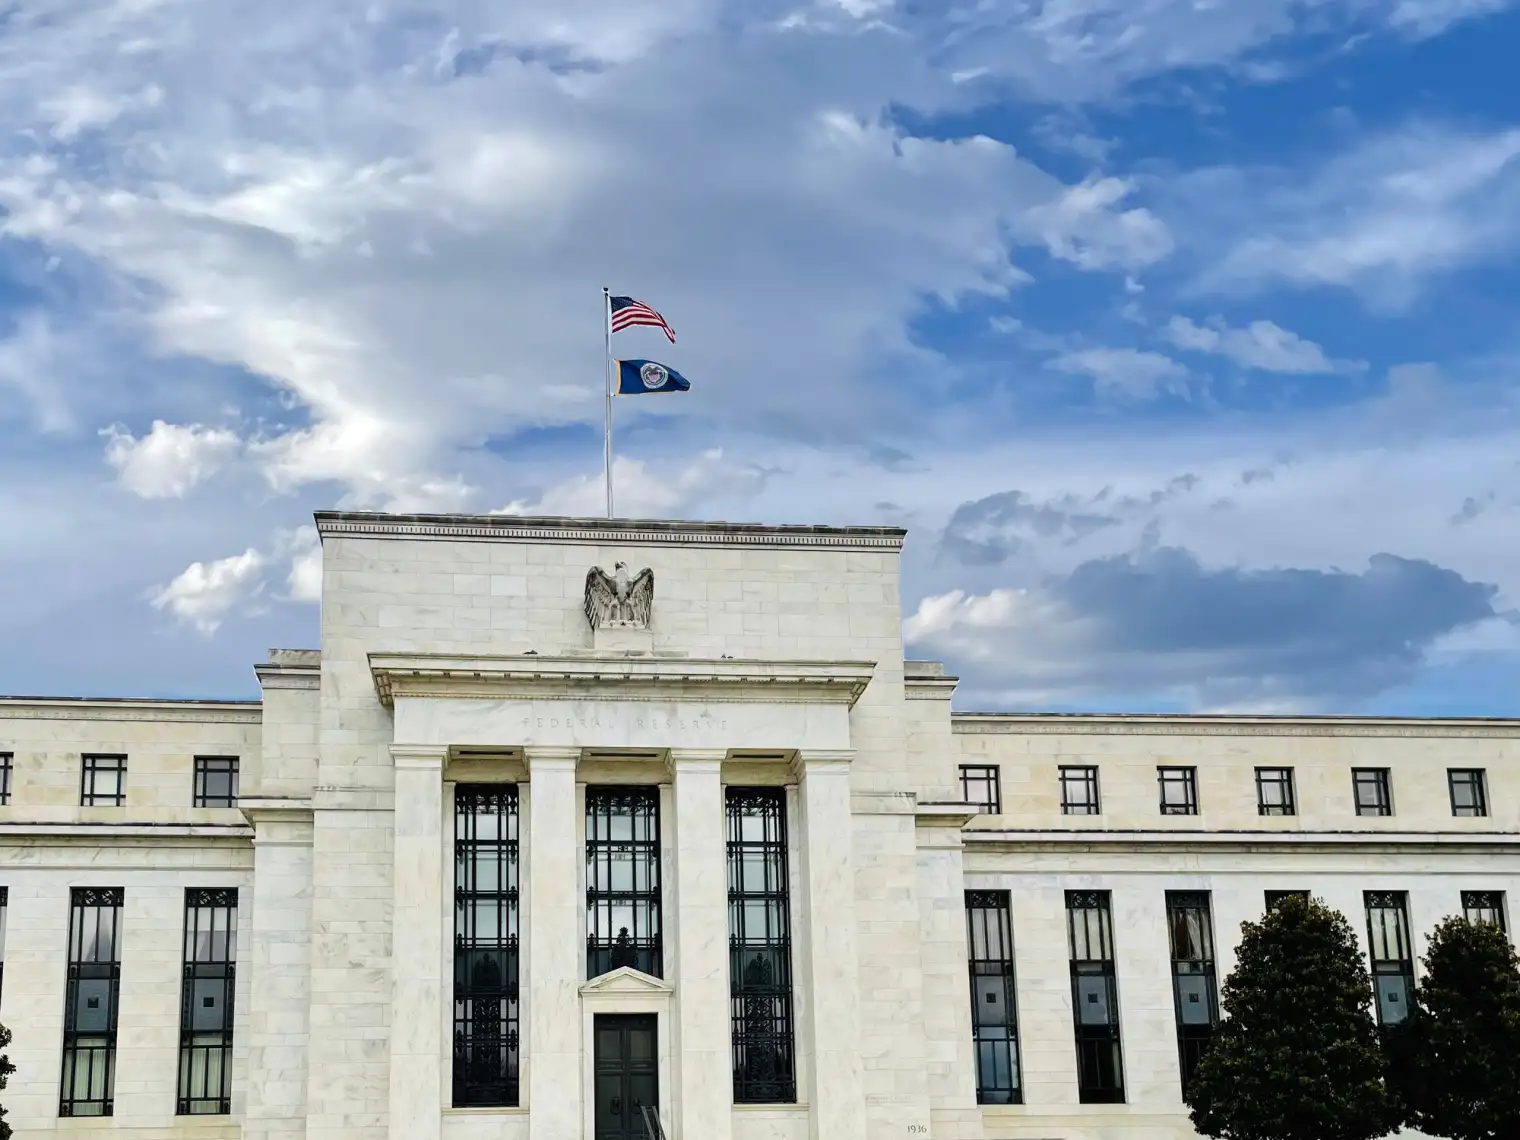 federal reserve building in washington d.c.